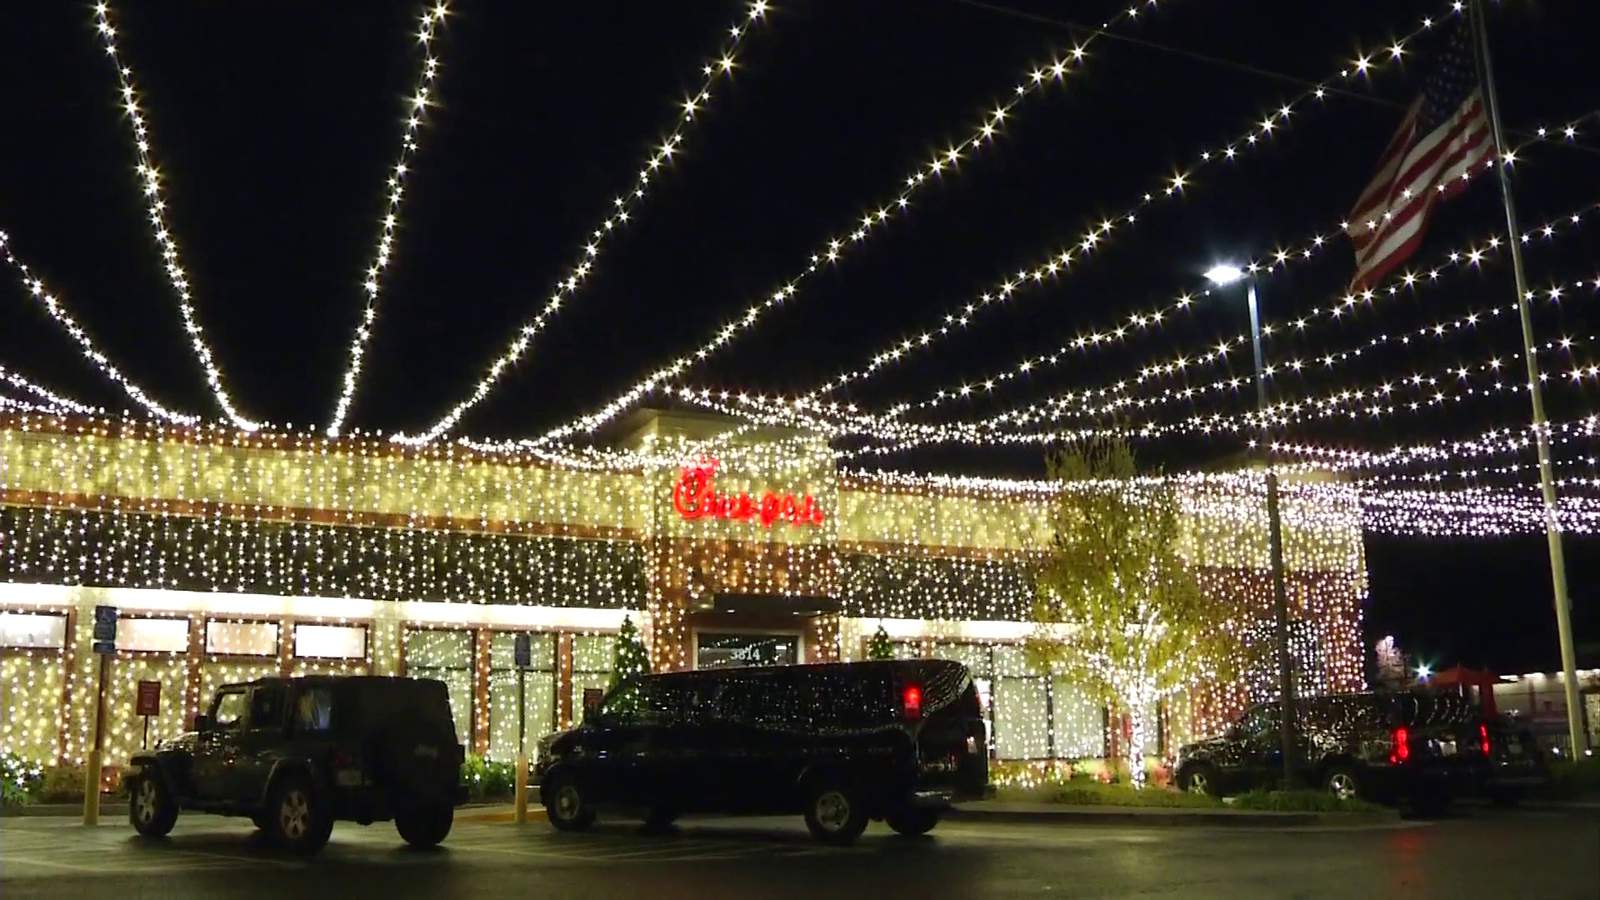 Chick-fil-A in Roanoke decked the halls with over 55,000 Christmas lights